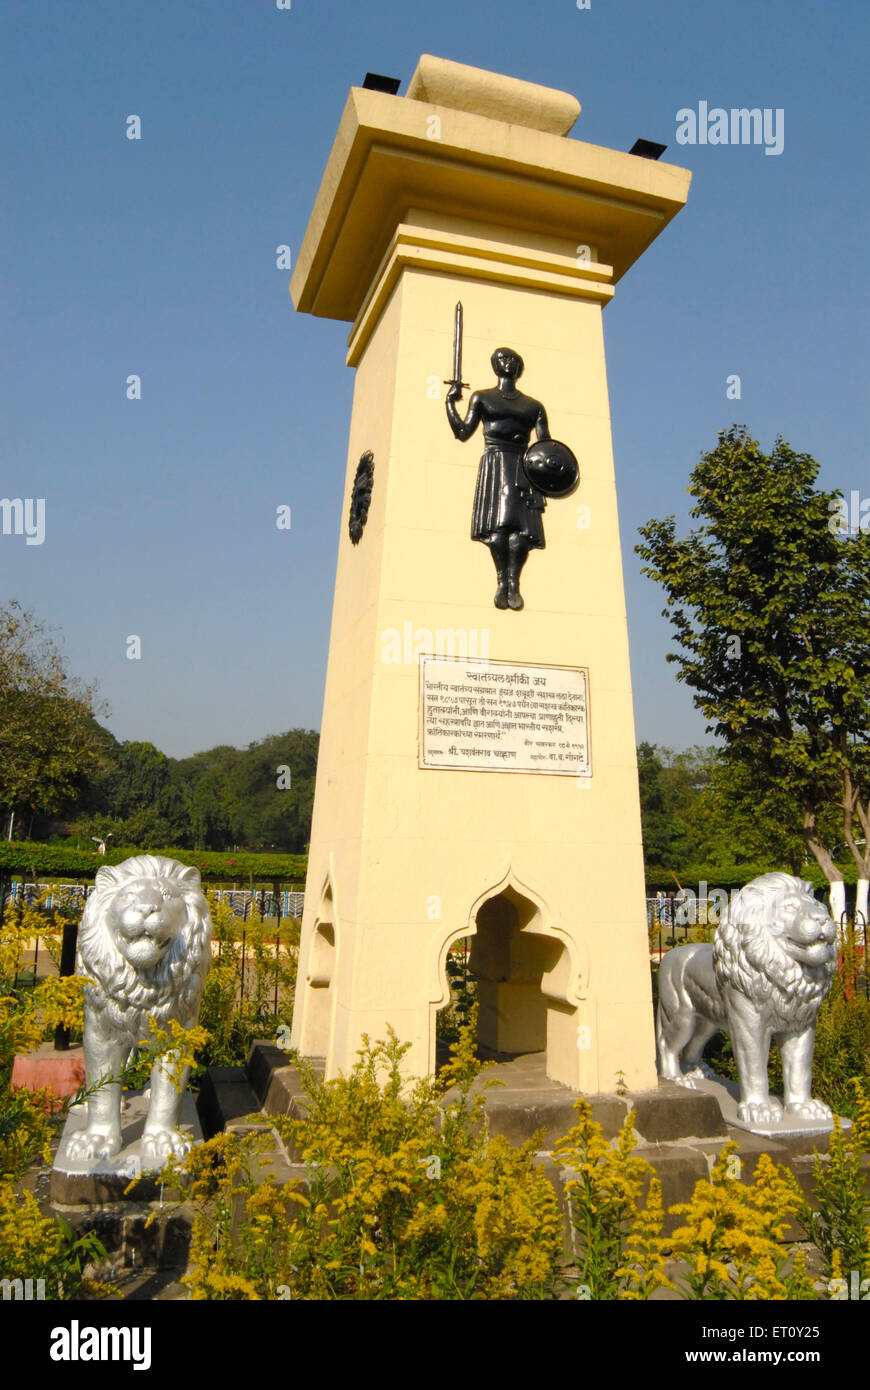 Memorial of armed freedom fighters from year 1857 1947 at Saras Baug ; Pune ; Maharashtra ; India Stock Photo